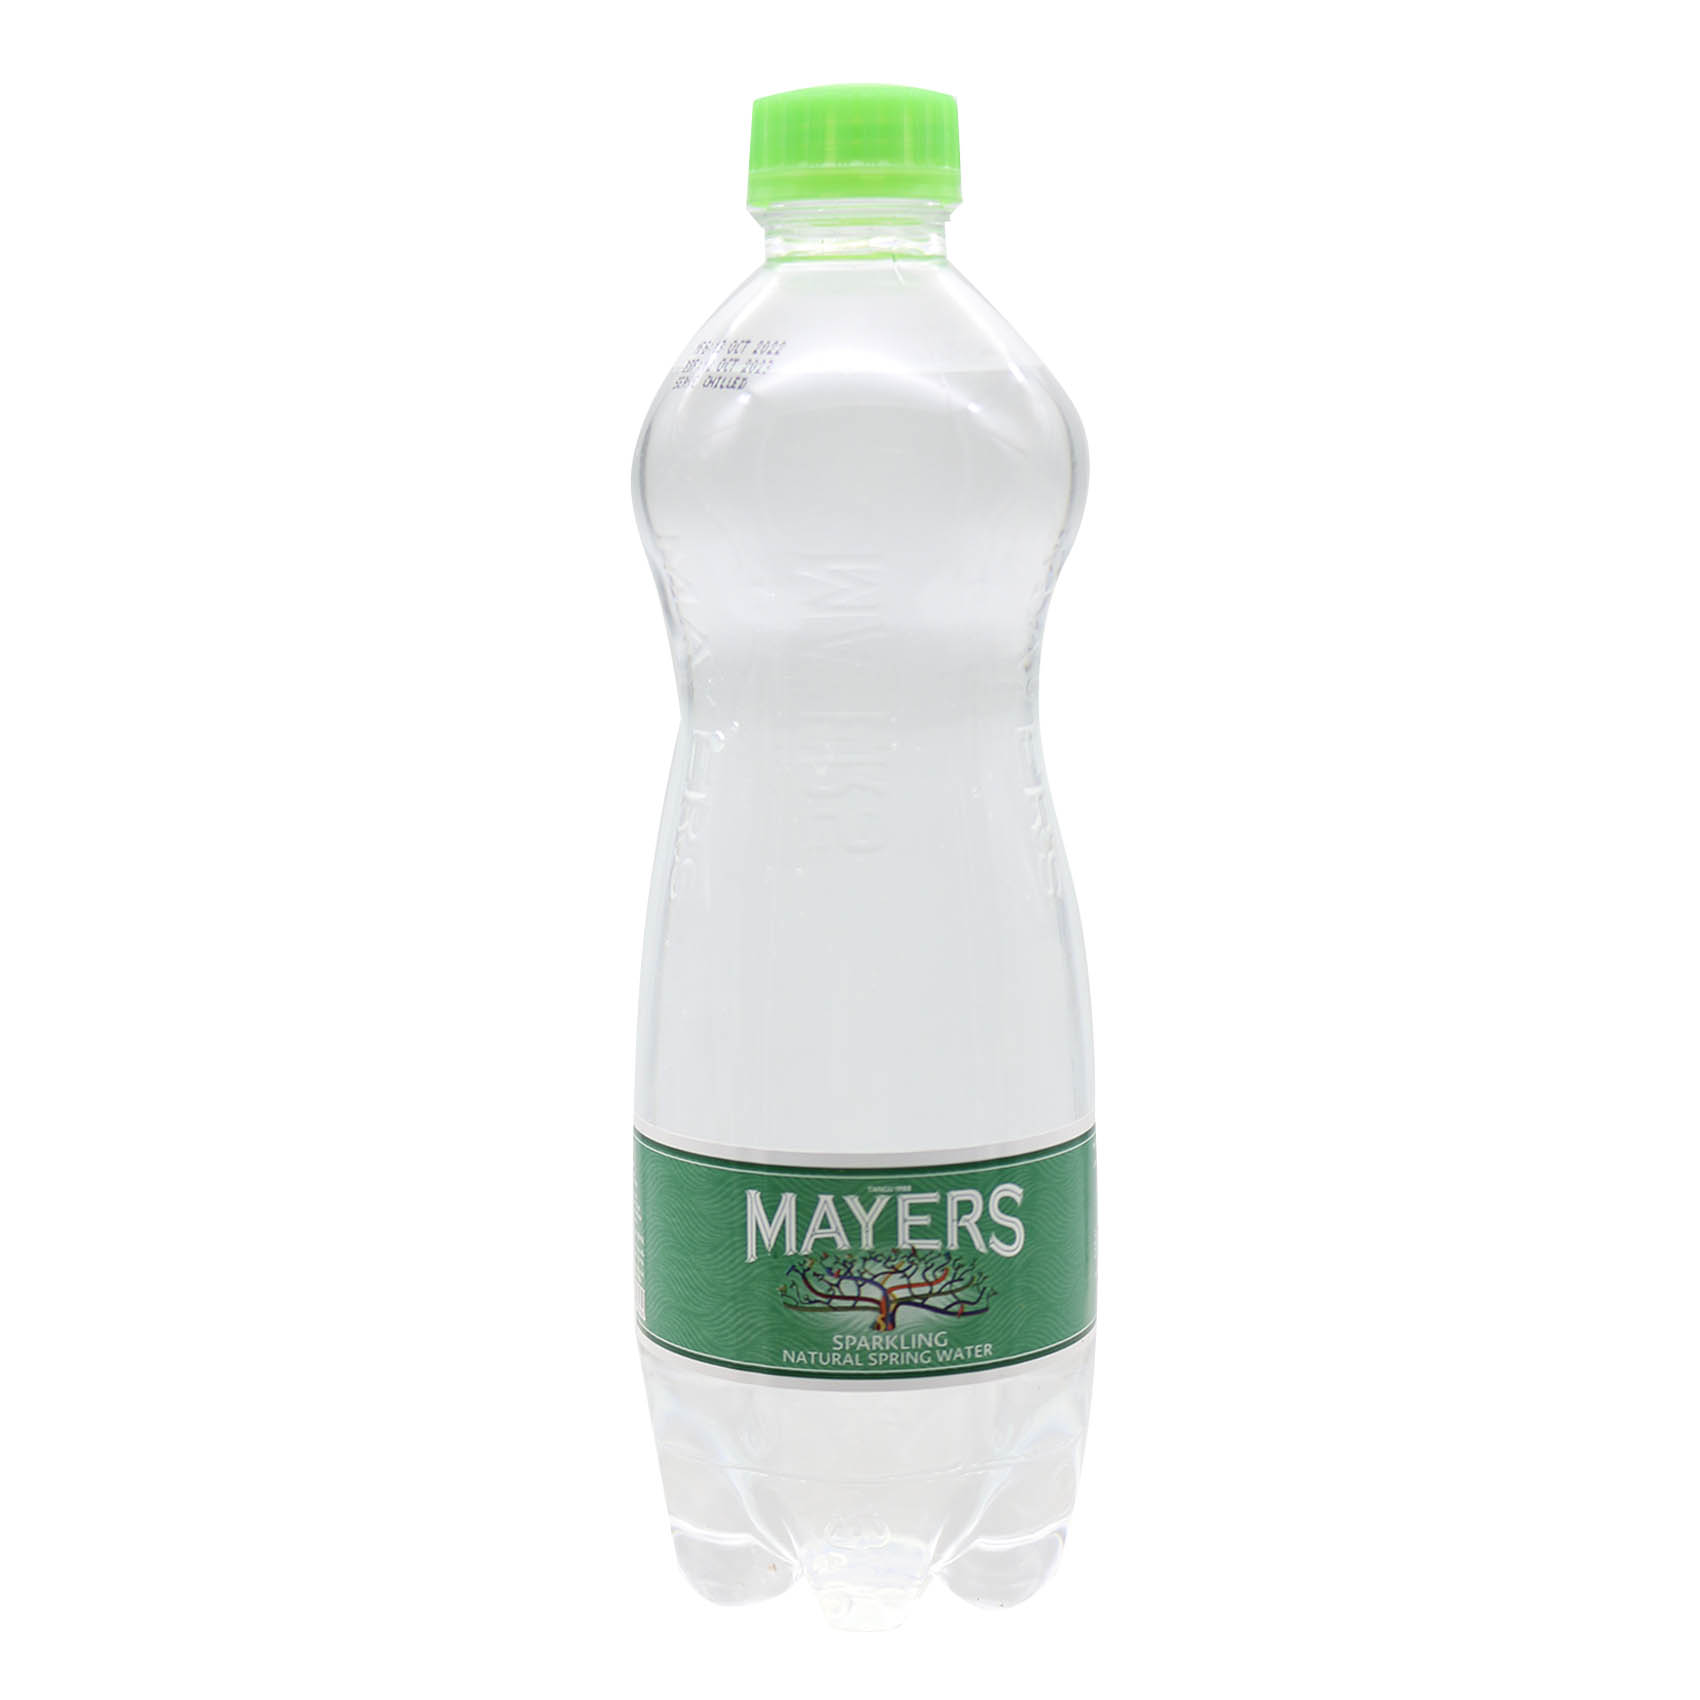 Mayers Natural Spring Sparkling Water 500ml